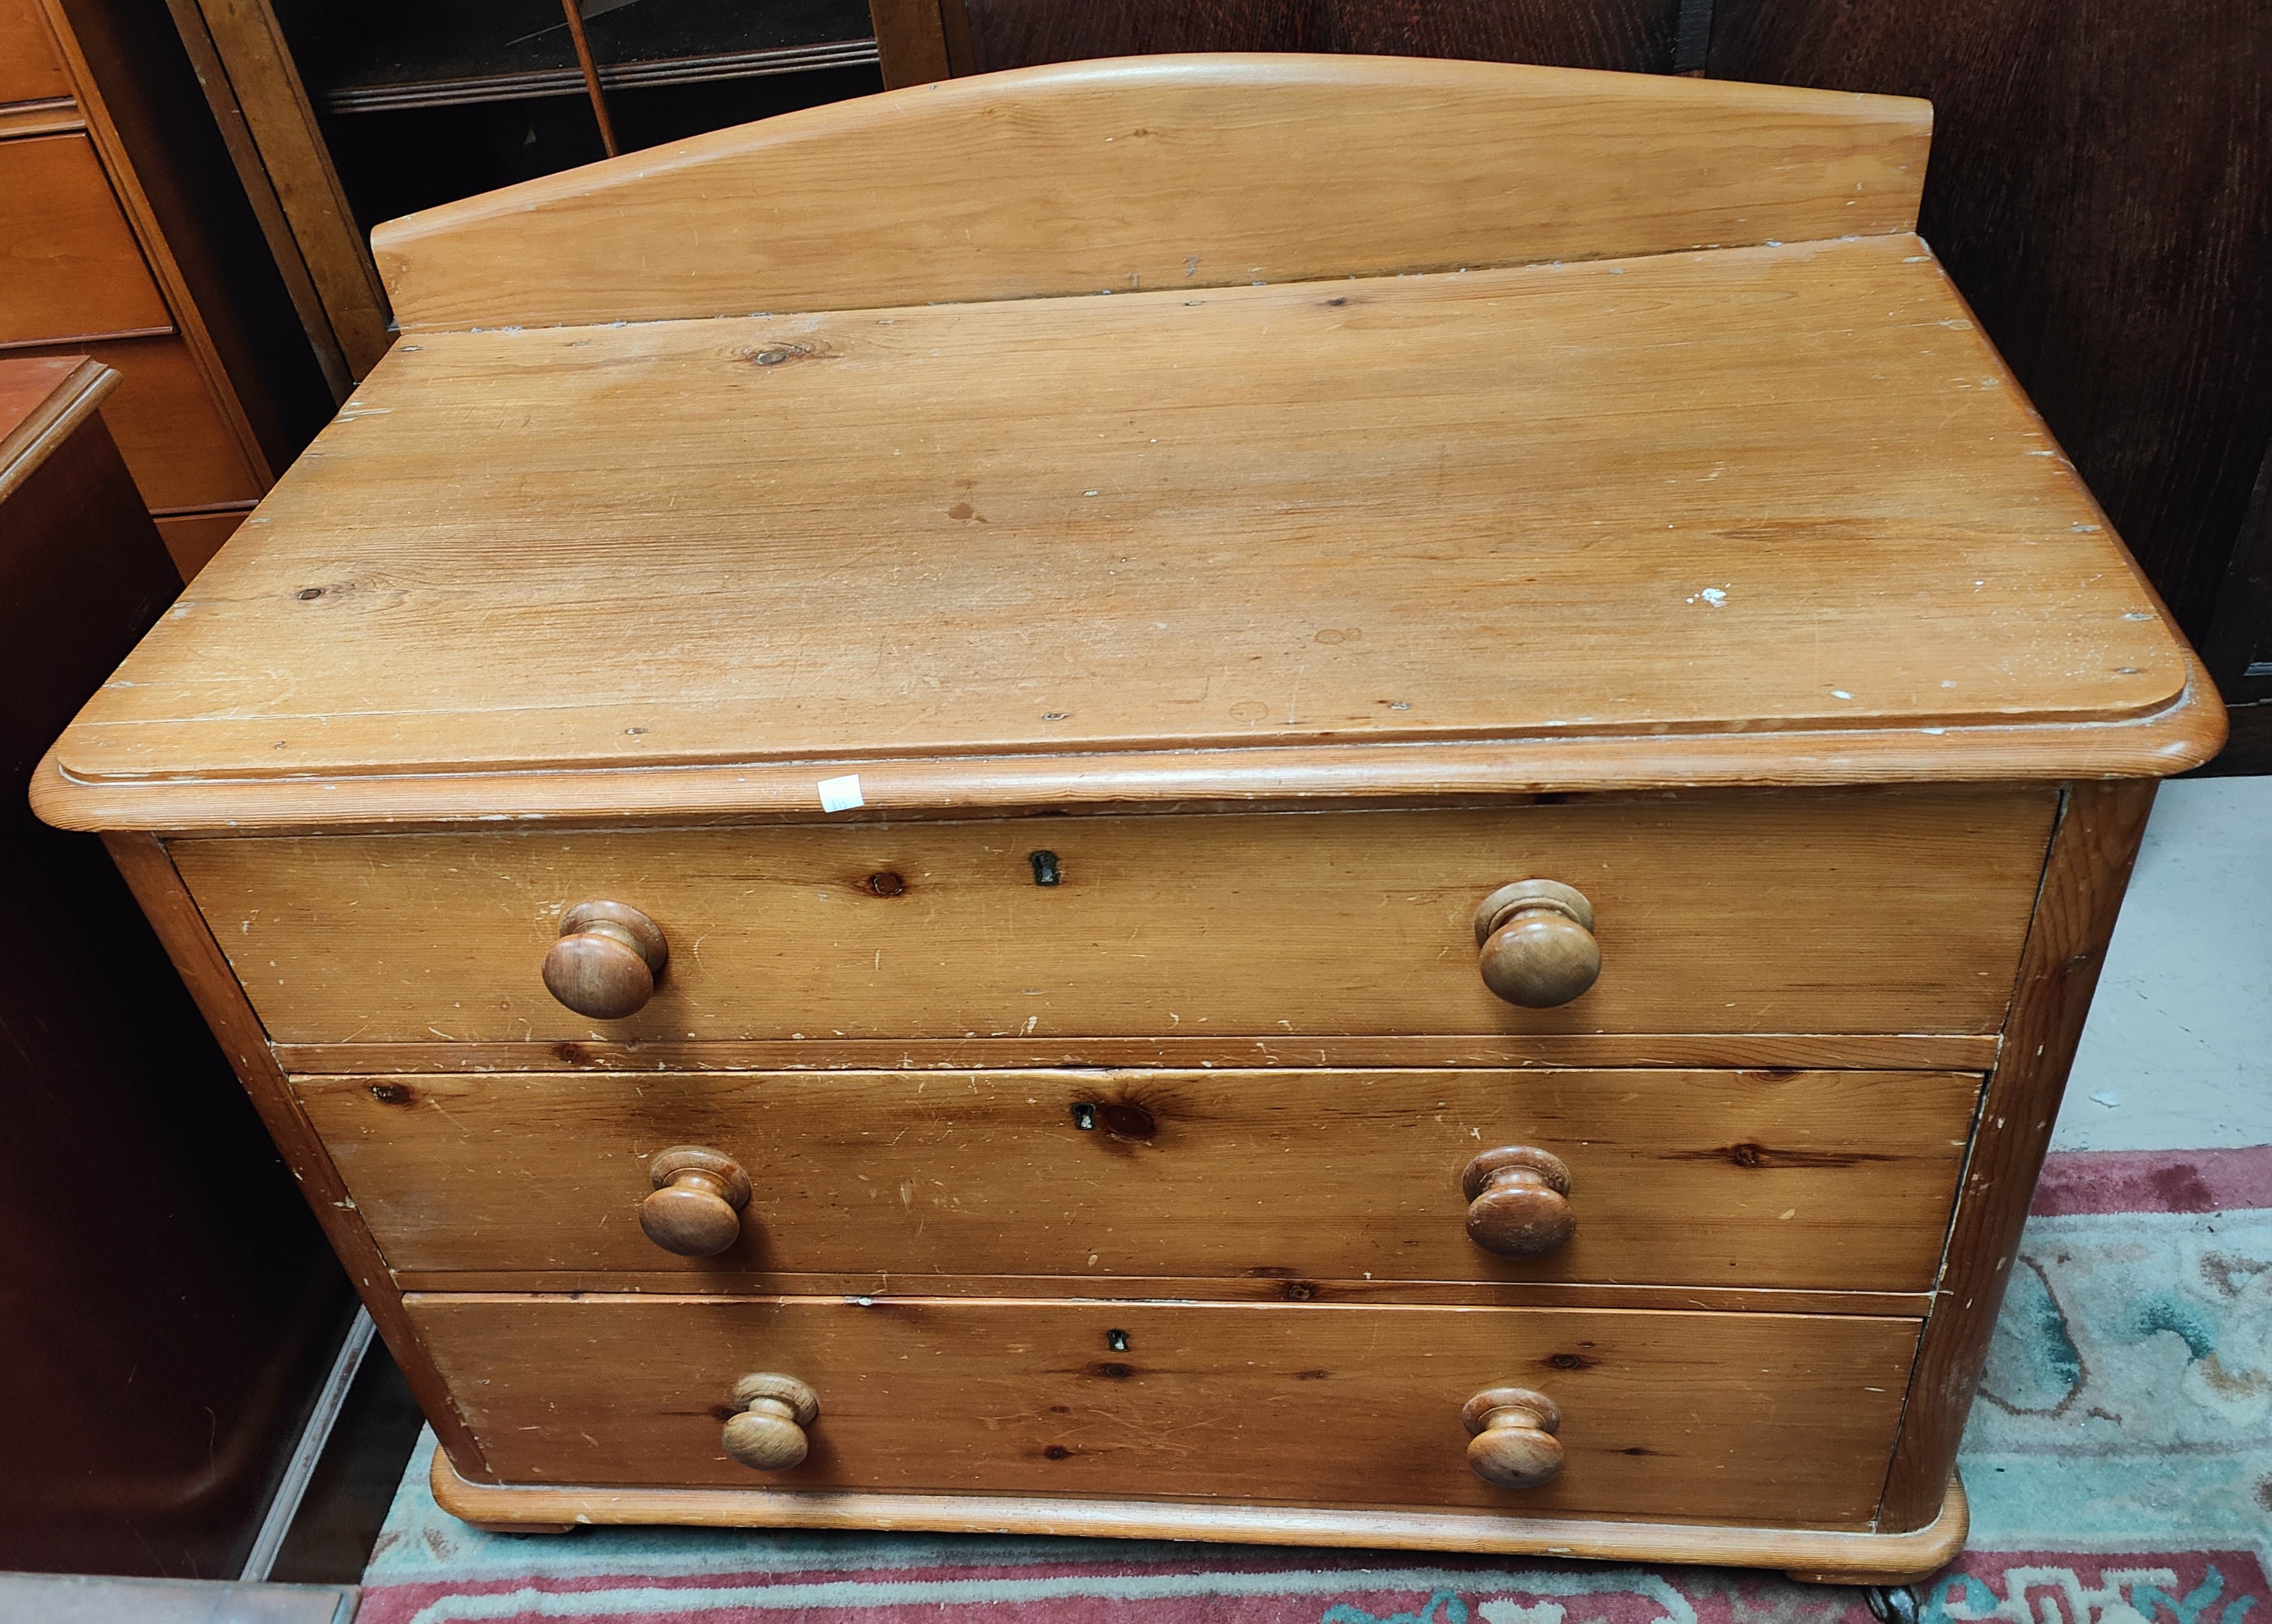 A small 3 height chest of drawers